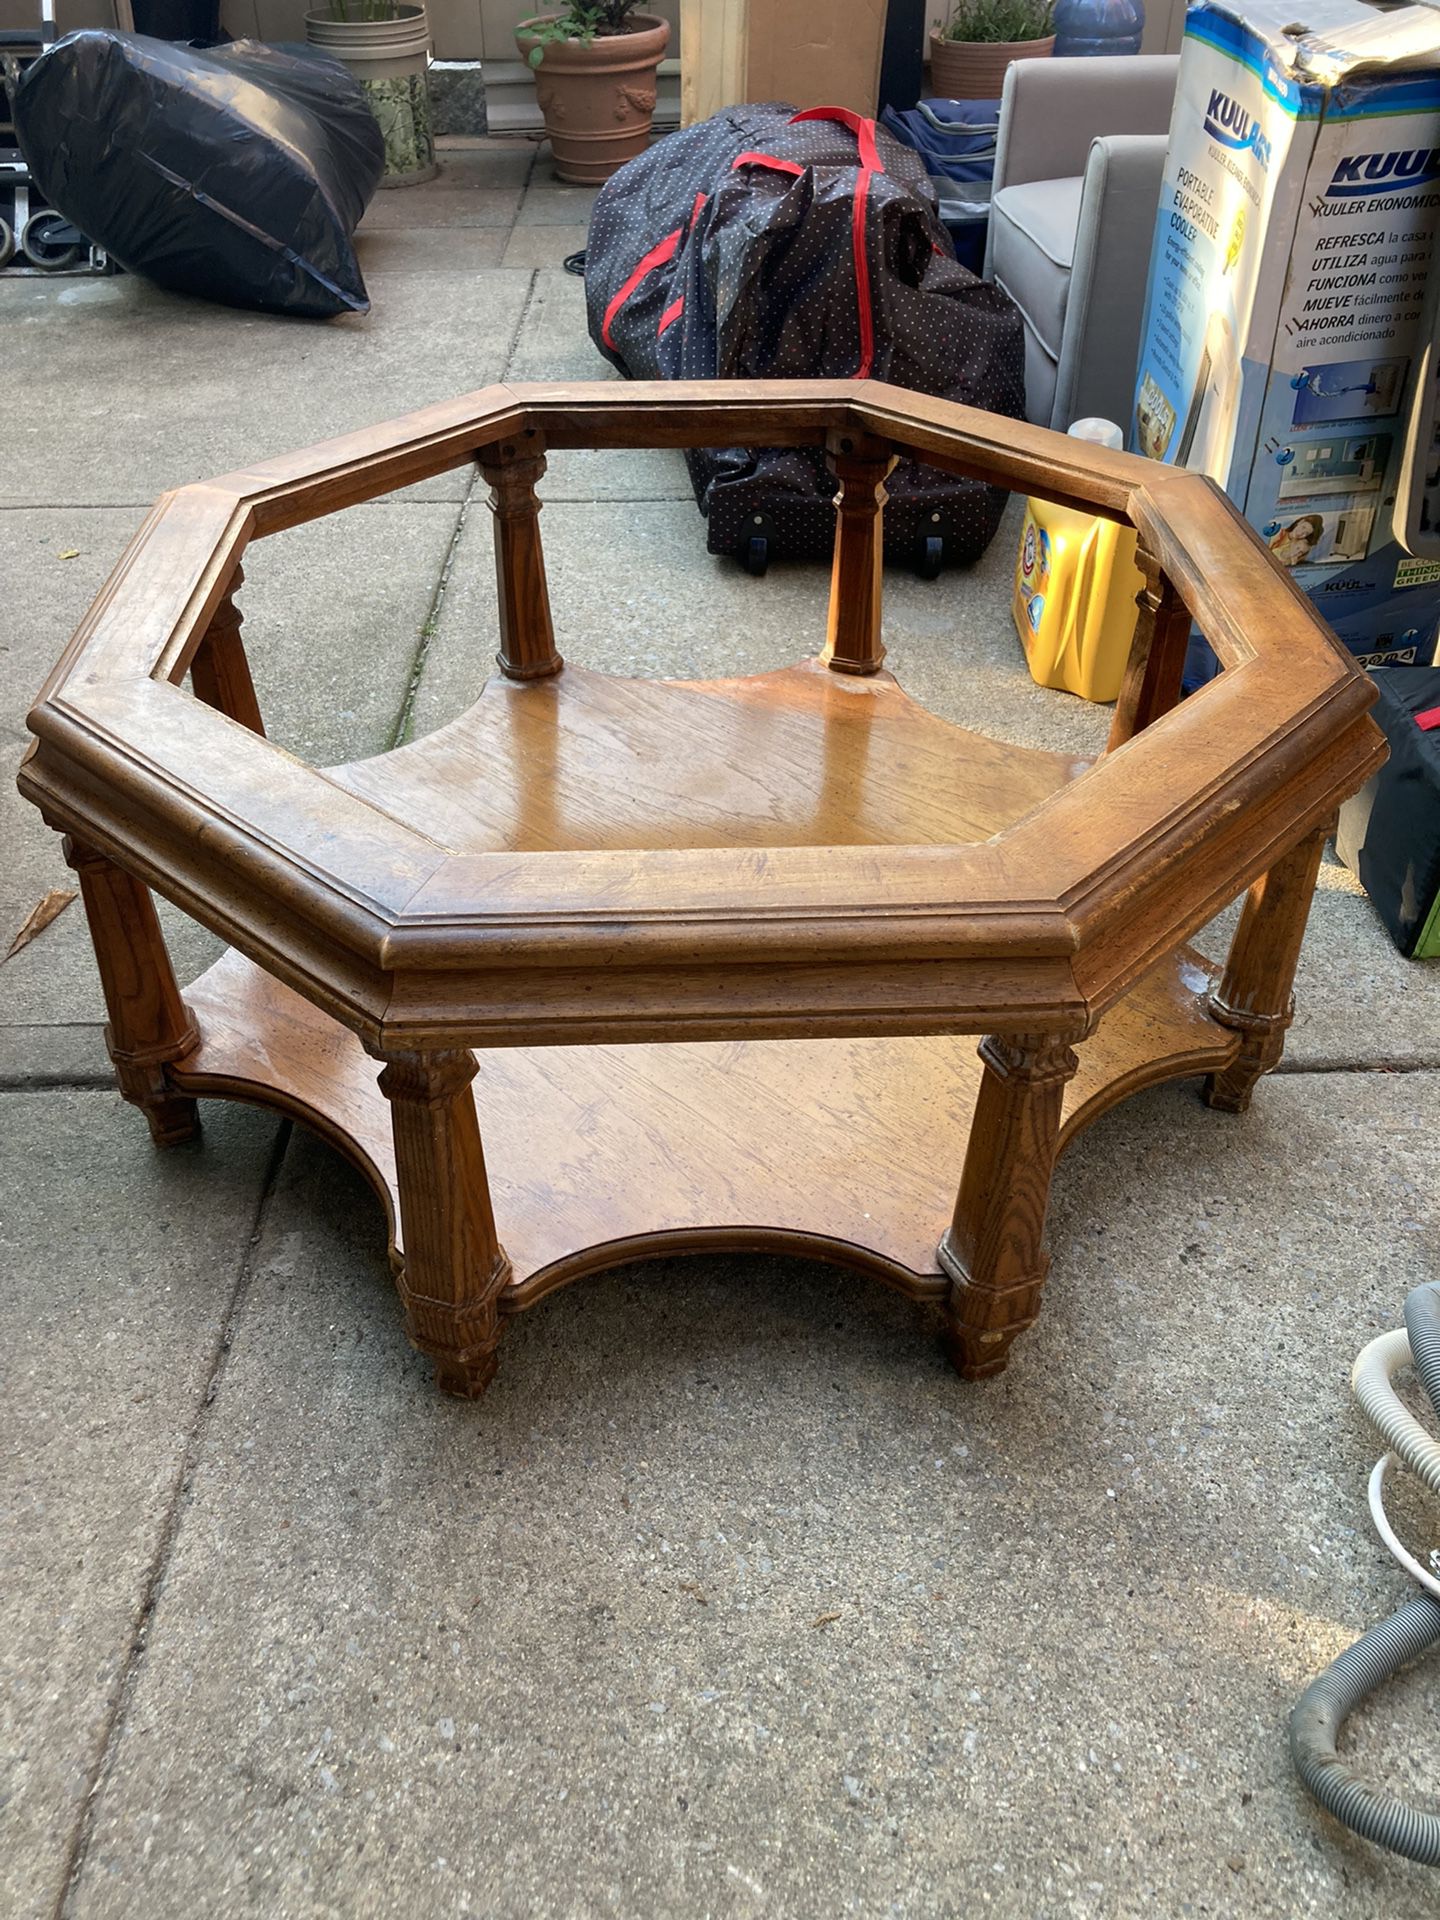 Vintage Coffee Table for Sale in The Bronx, NY - OfferUp